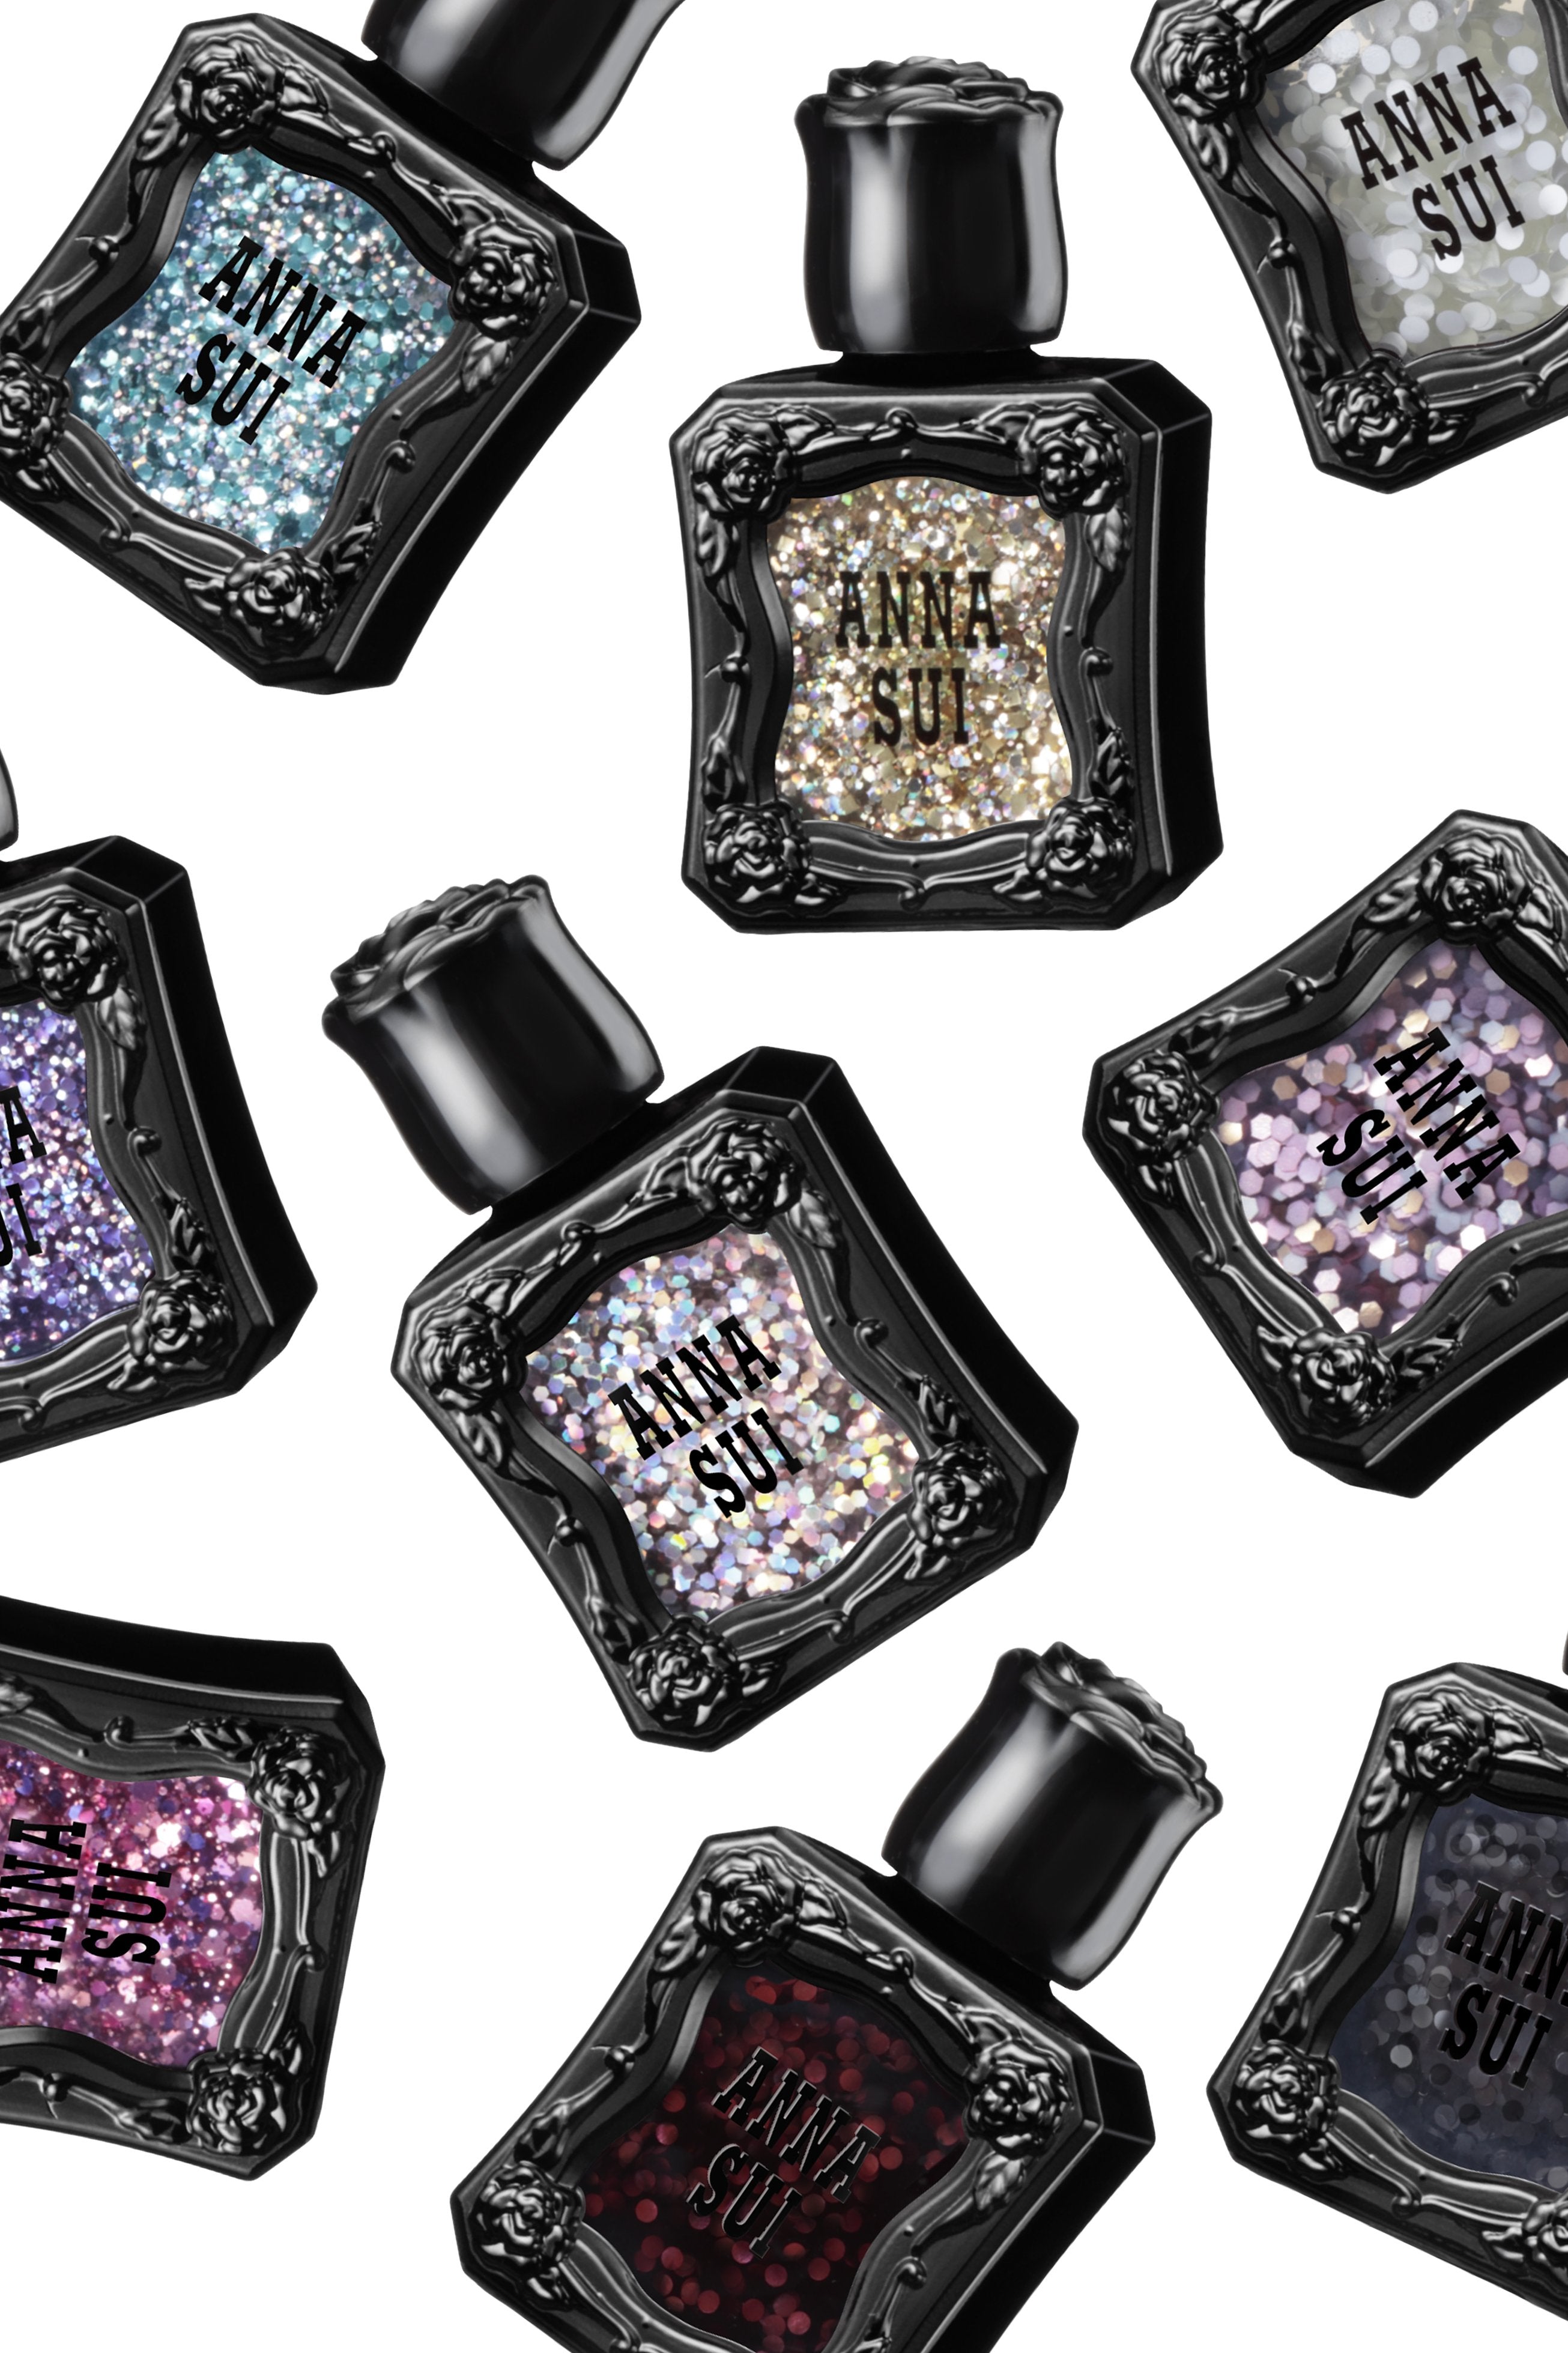 Inspired by the fragrance 9 bottles, black container with raised rose pattern, Anna Sui on dark color.